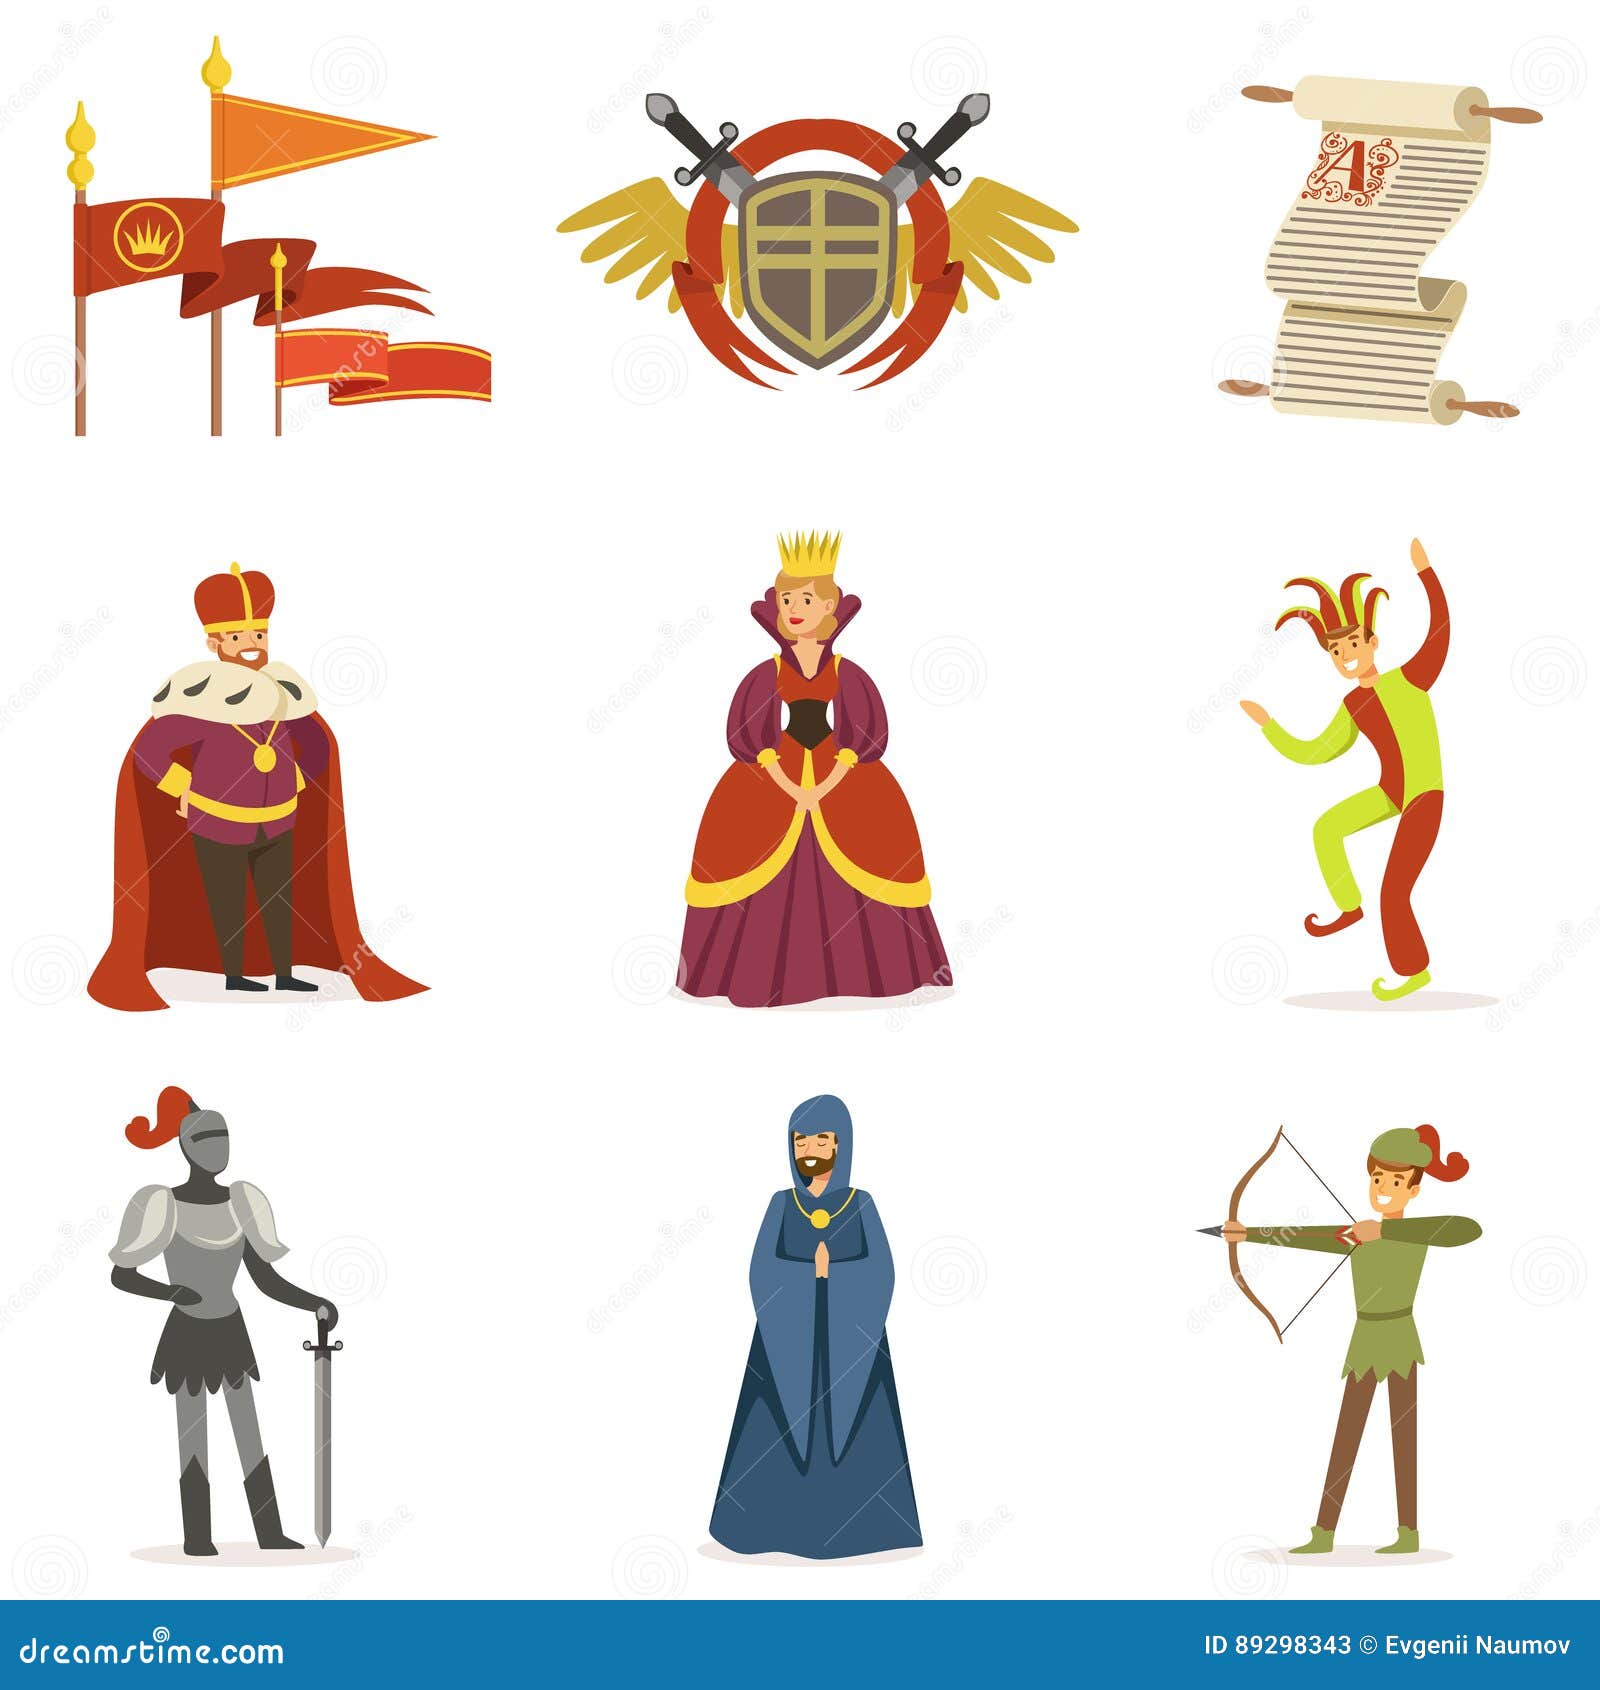 Medieval Cartoon Characters and European Middle Ages Historic Period  Attributes Collection of Icons Stock Vector - Illustration of character,  collection: 89298343